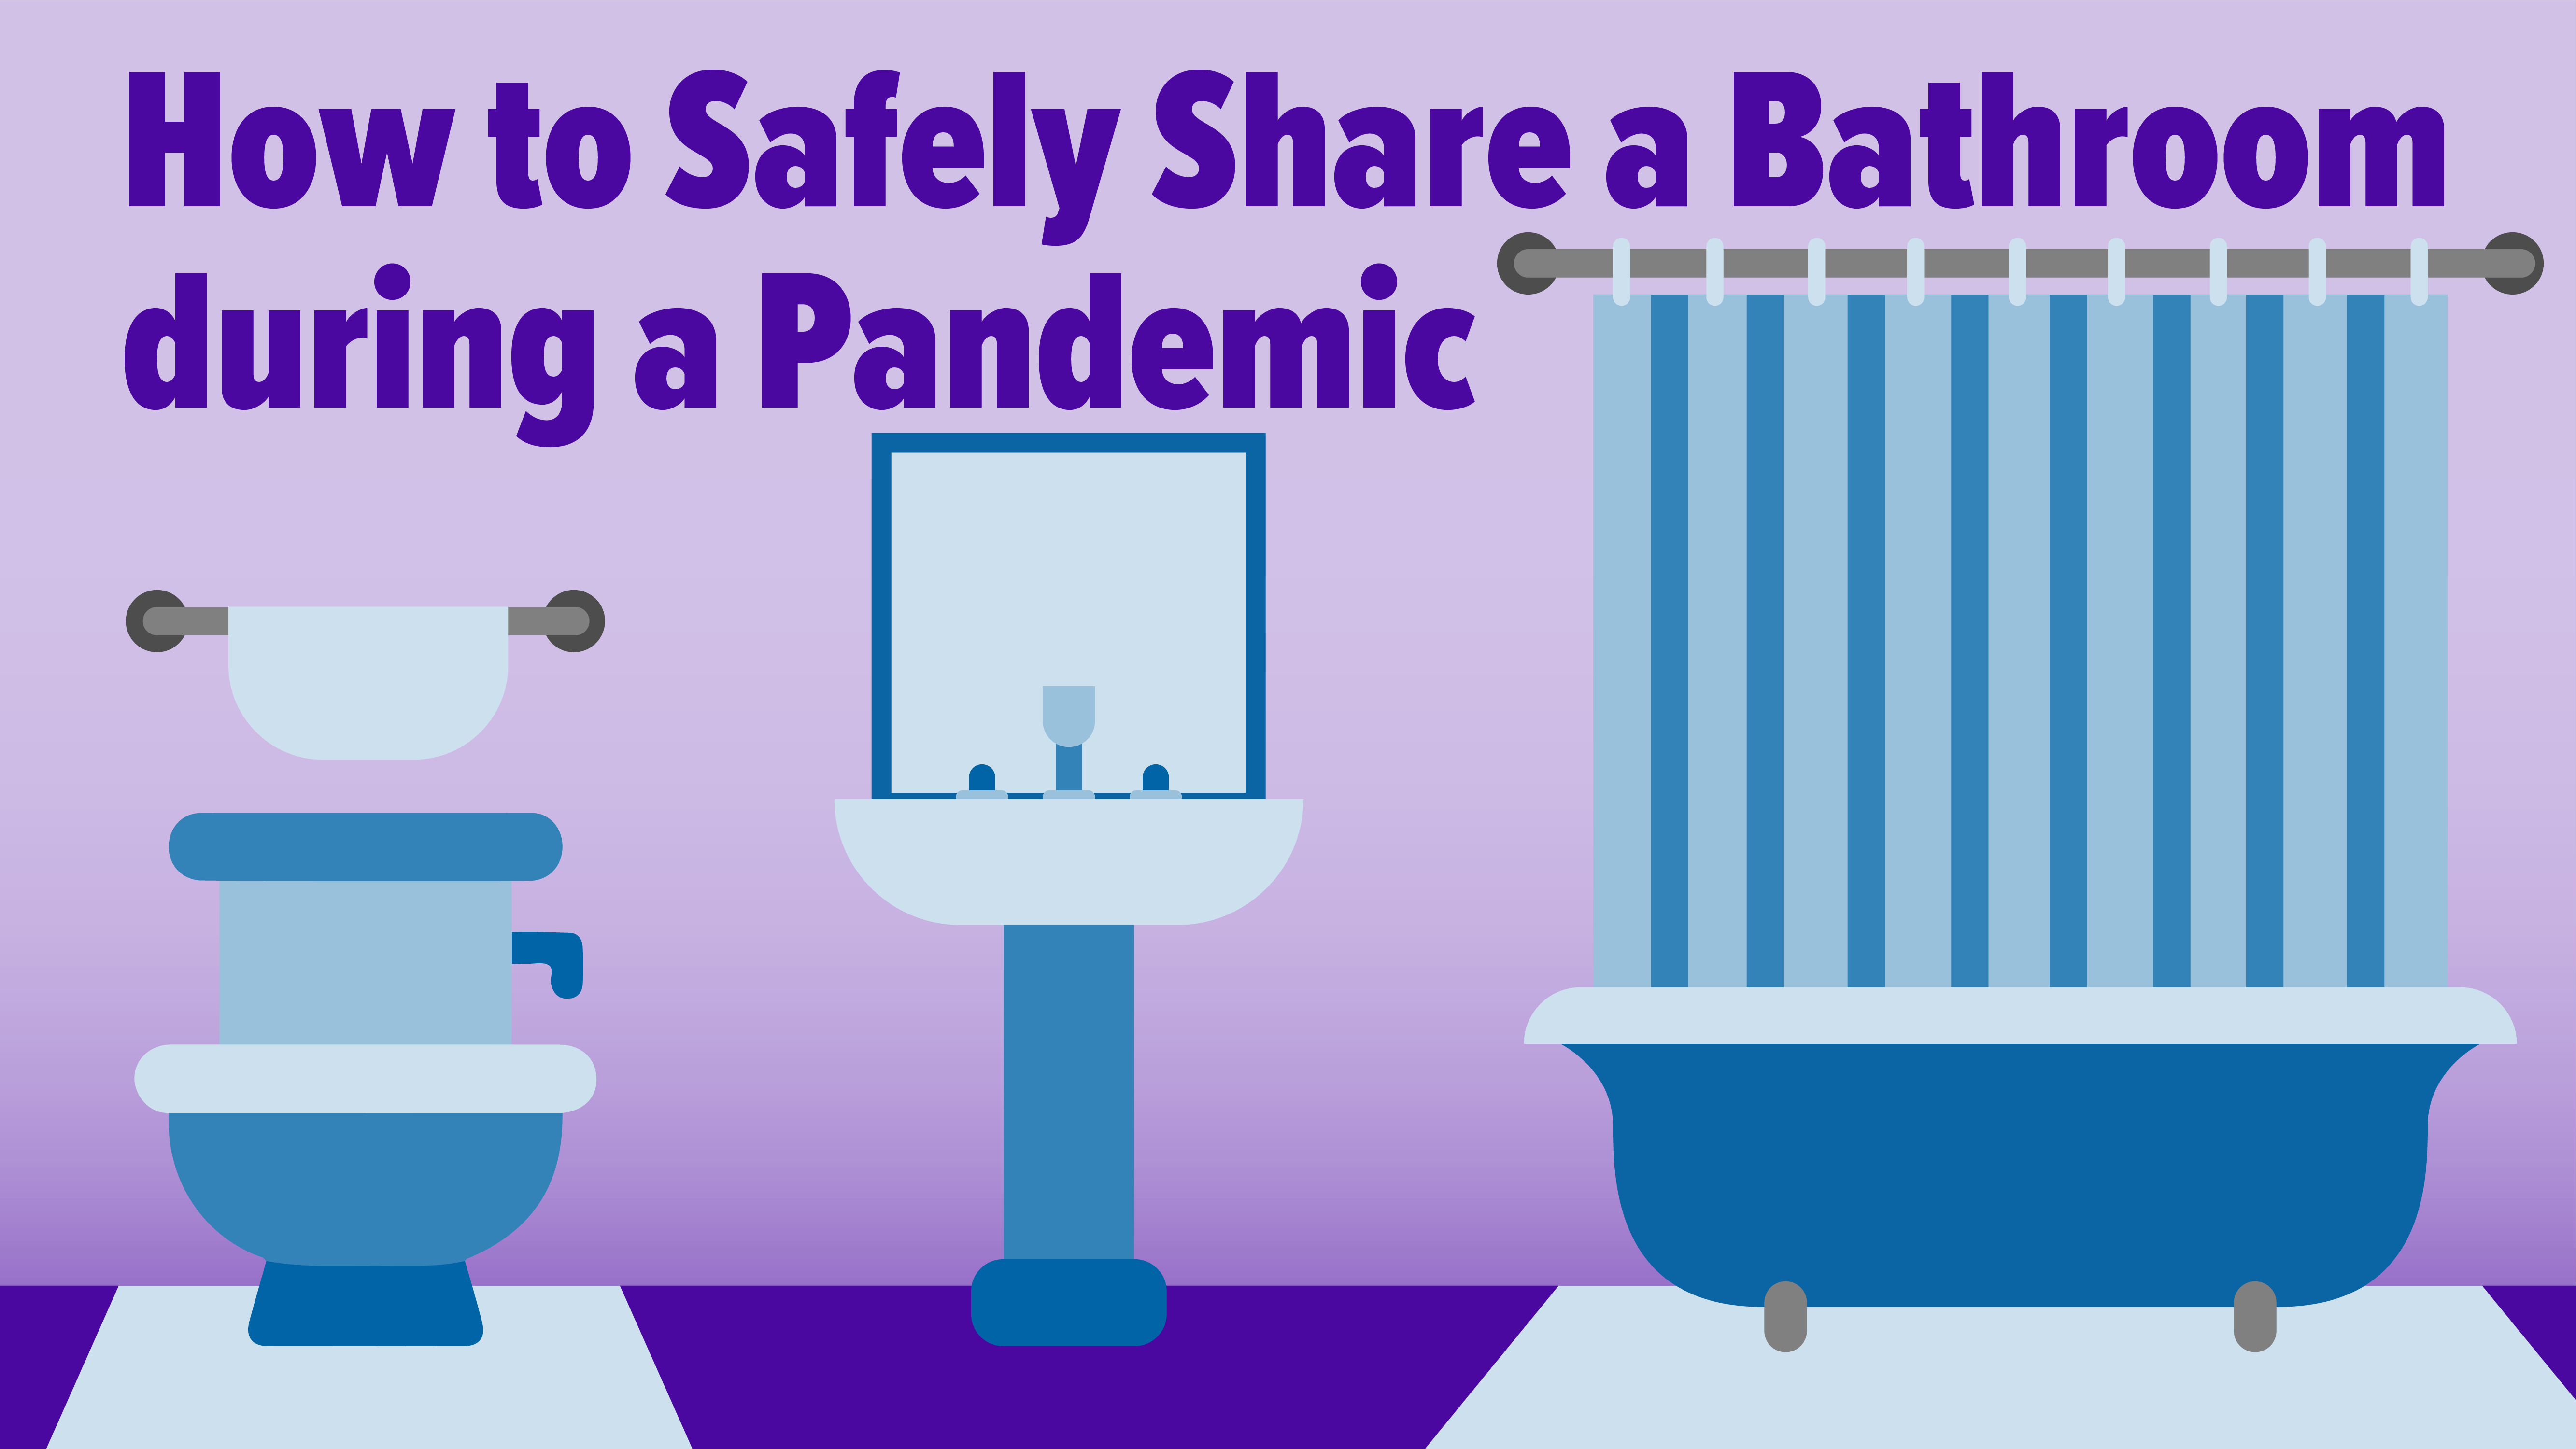 How to Safely Share a Bathroom during a Pandemic